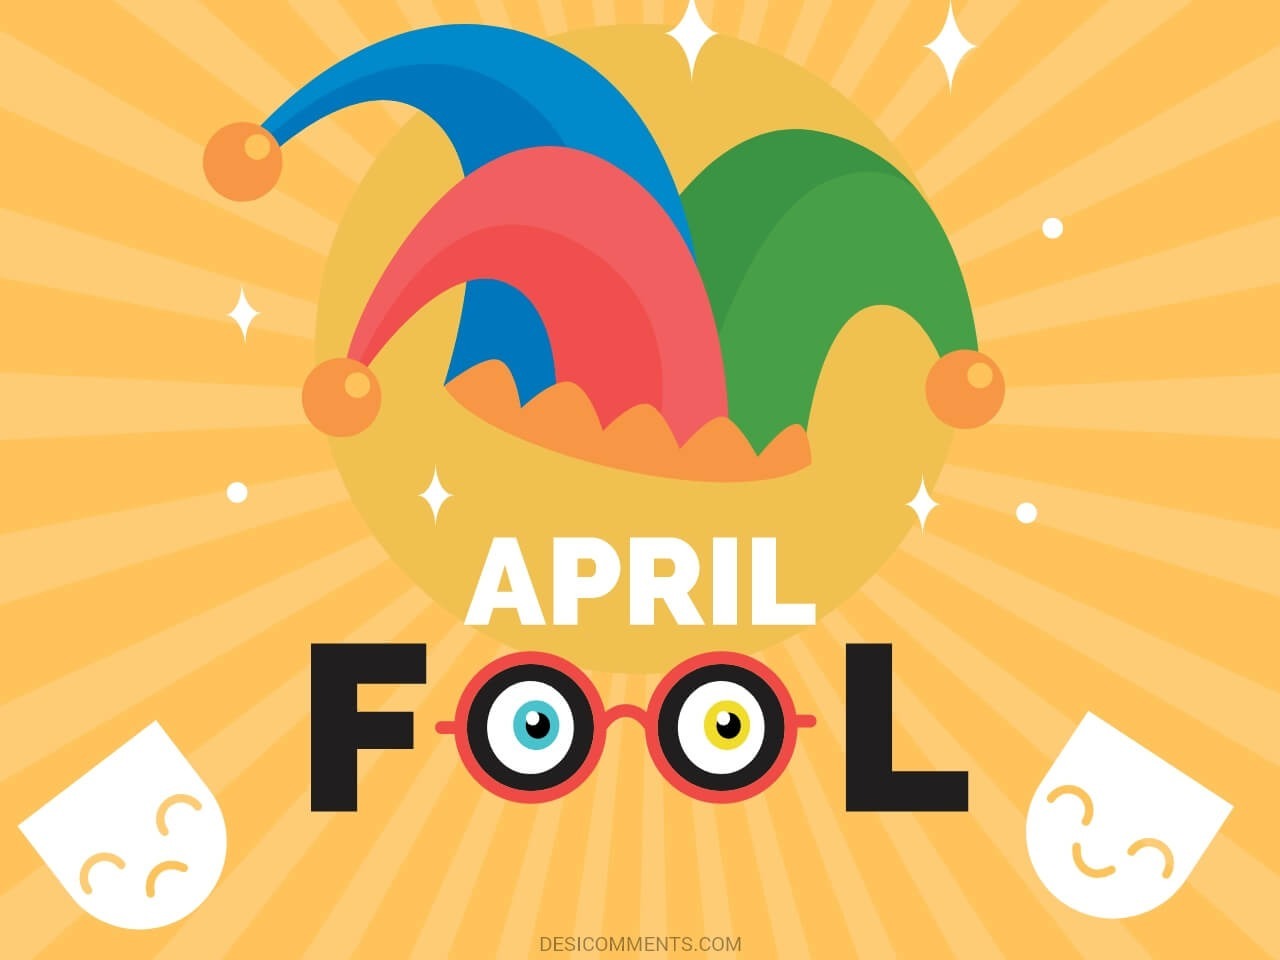 210+ April Fool’s Day Pictures, Images, Photos